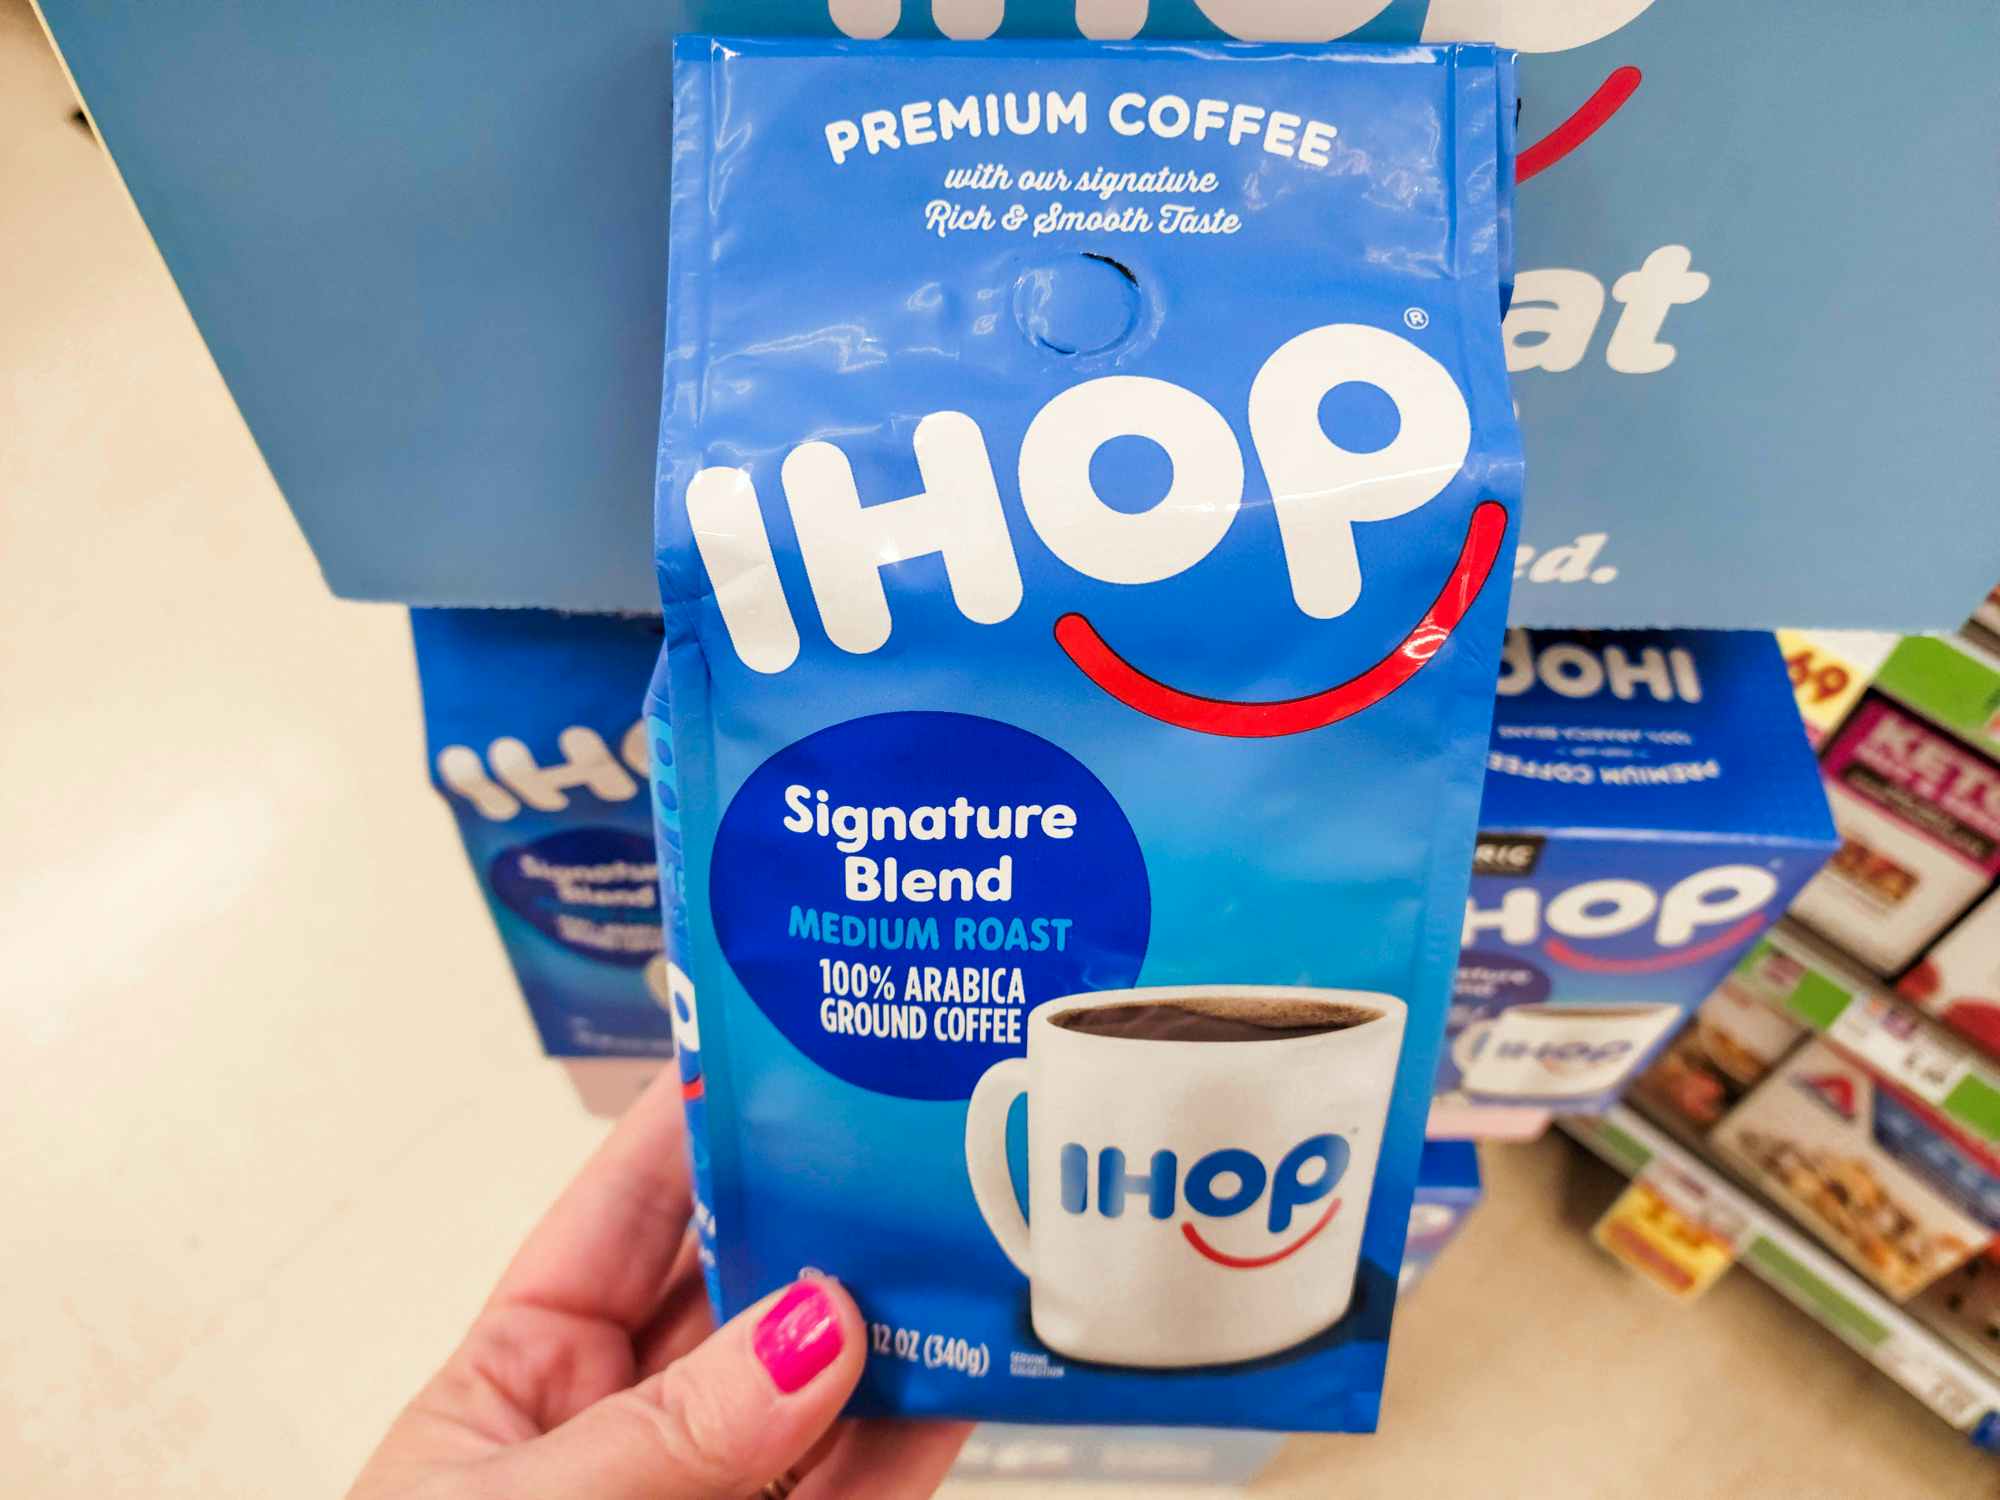 Someone holding up a bag of IHOP coffee